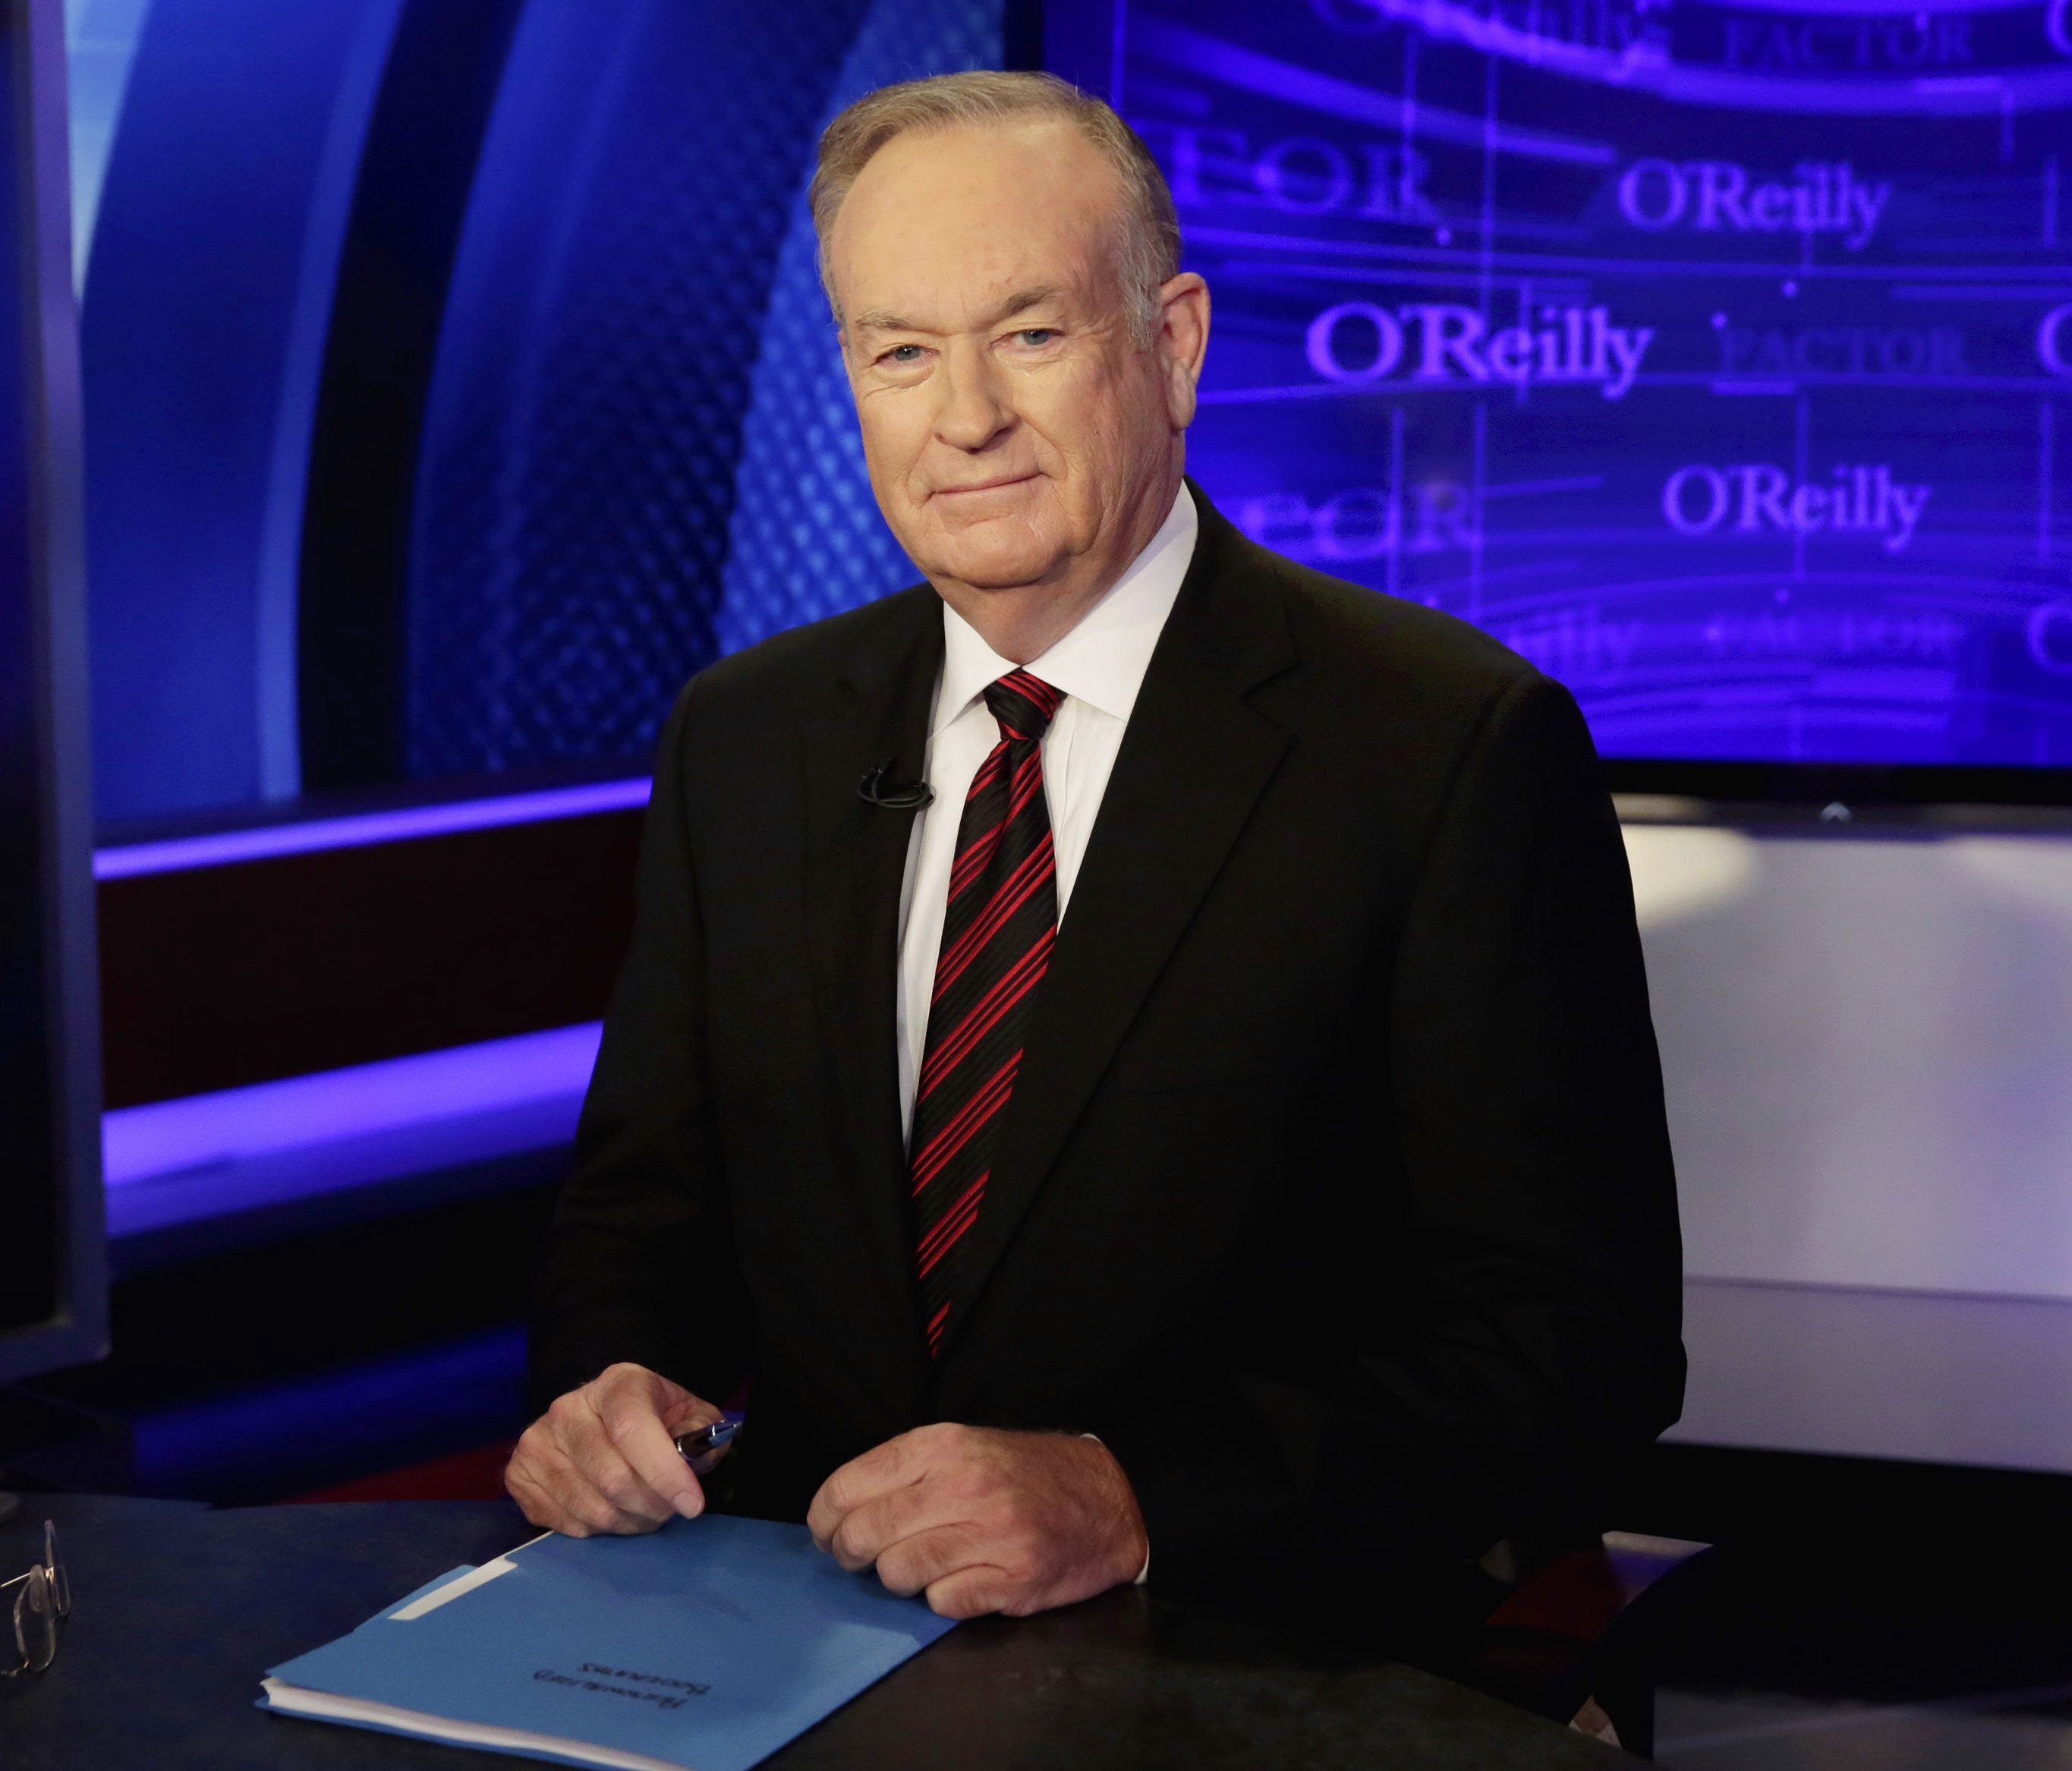 Bill O'Reilly is going on vacation, he announced Tuesday.